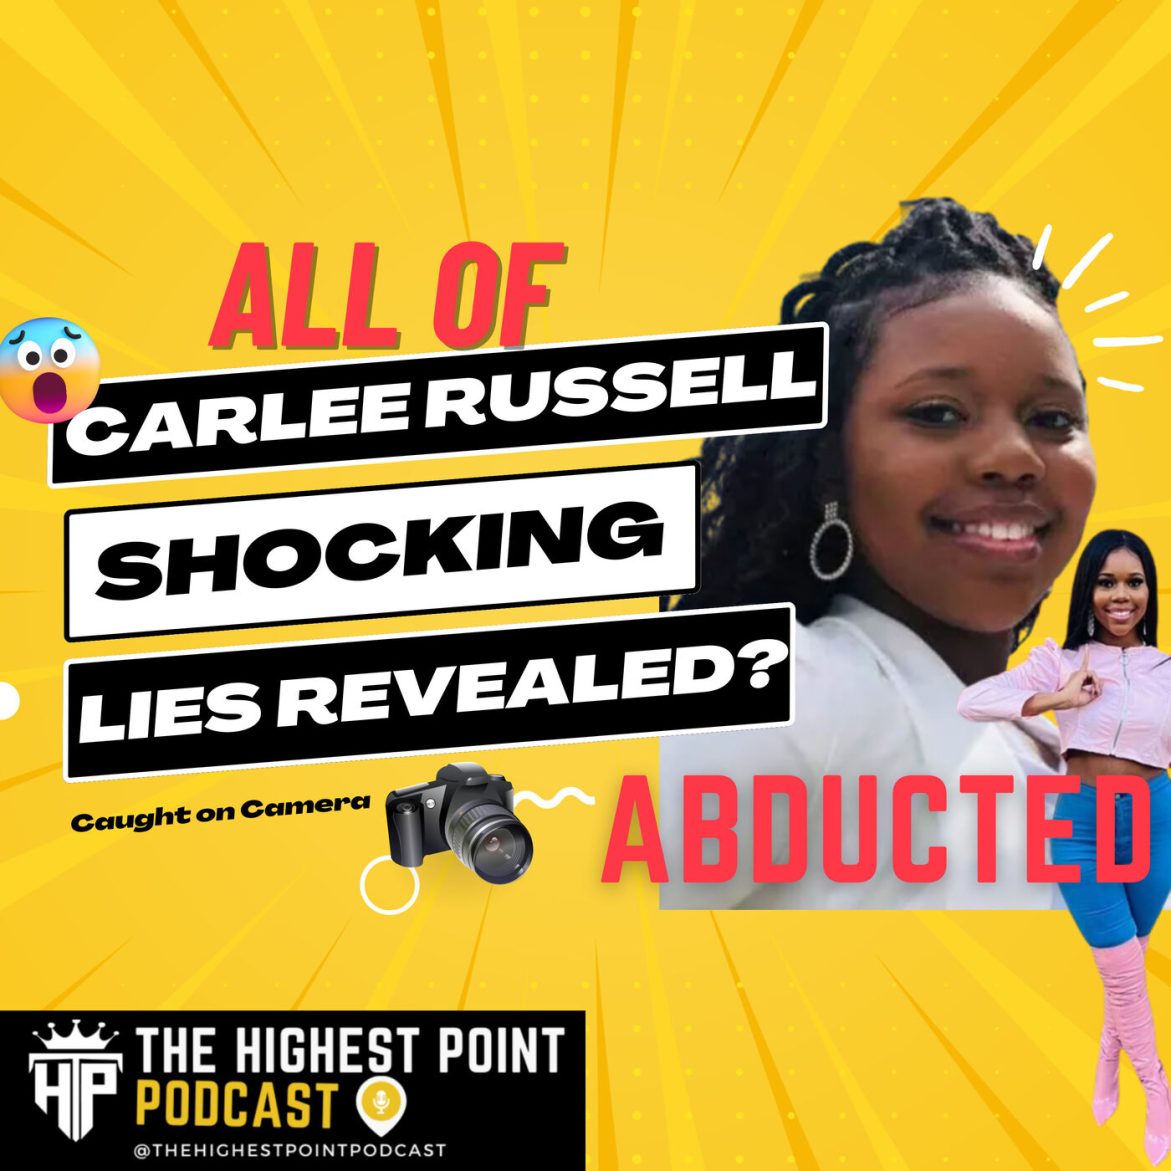 Black Podcasting - Carlee Russell update - FULL abduction details revealed, is it our fault this keeps happening?